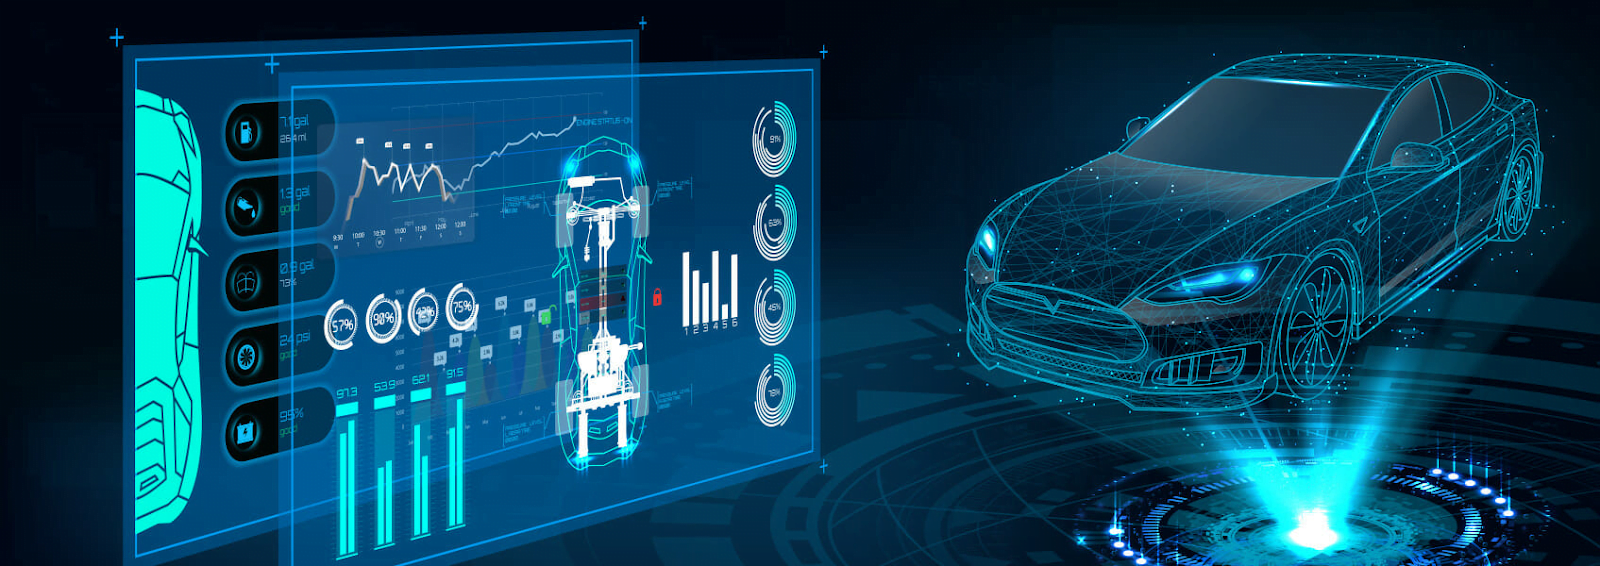 Top 7 New Trends in Automotive Technology